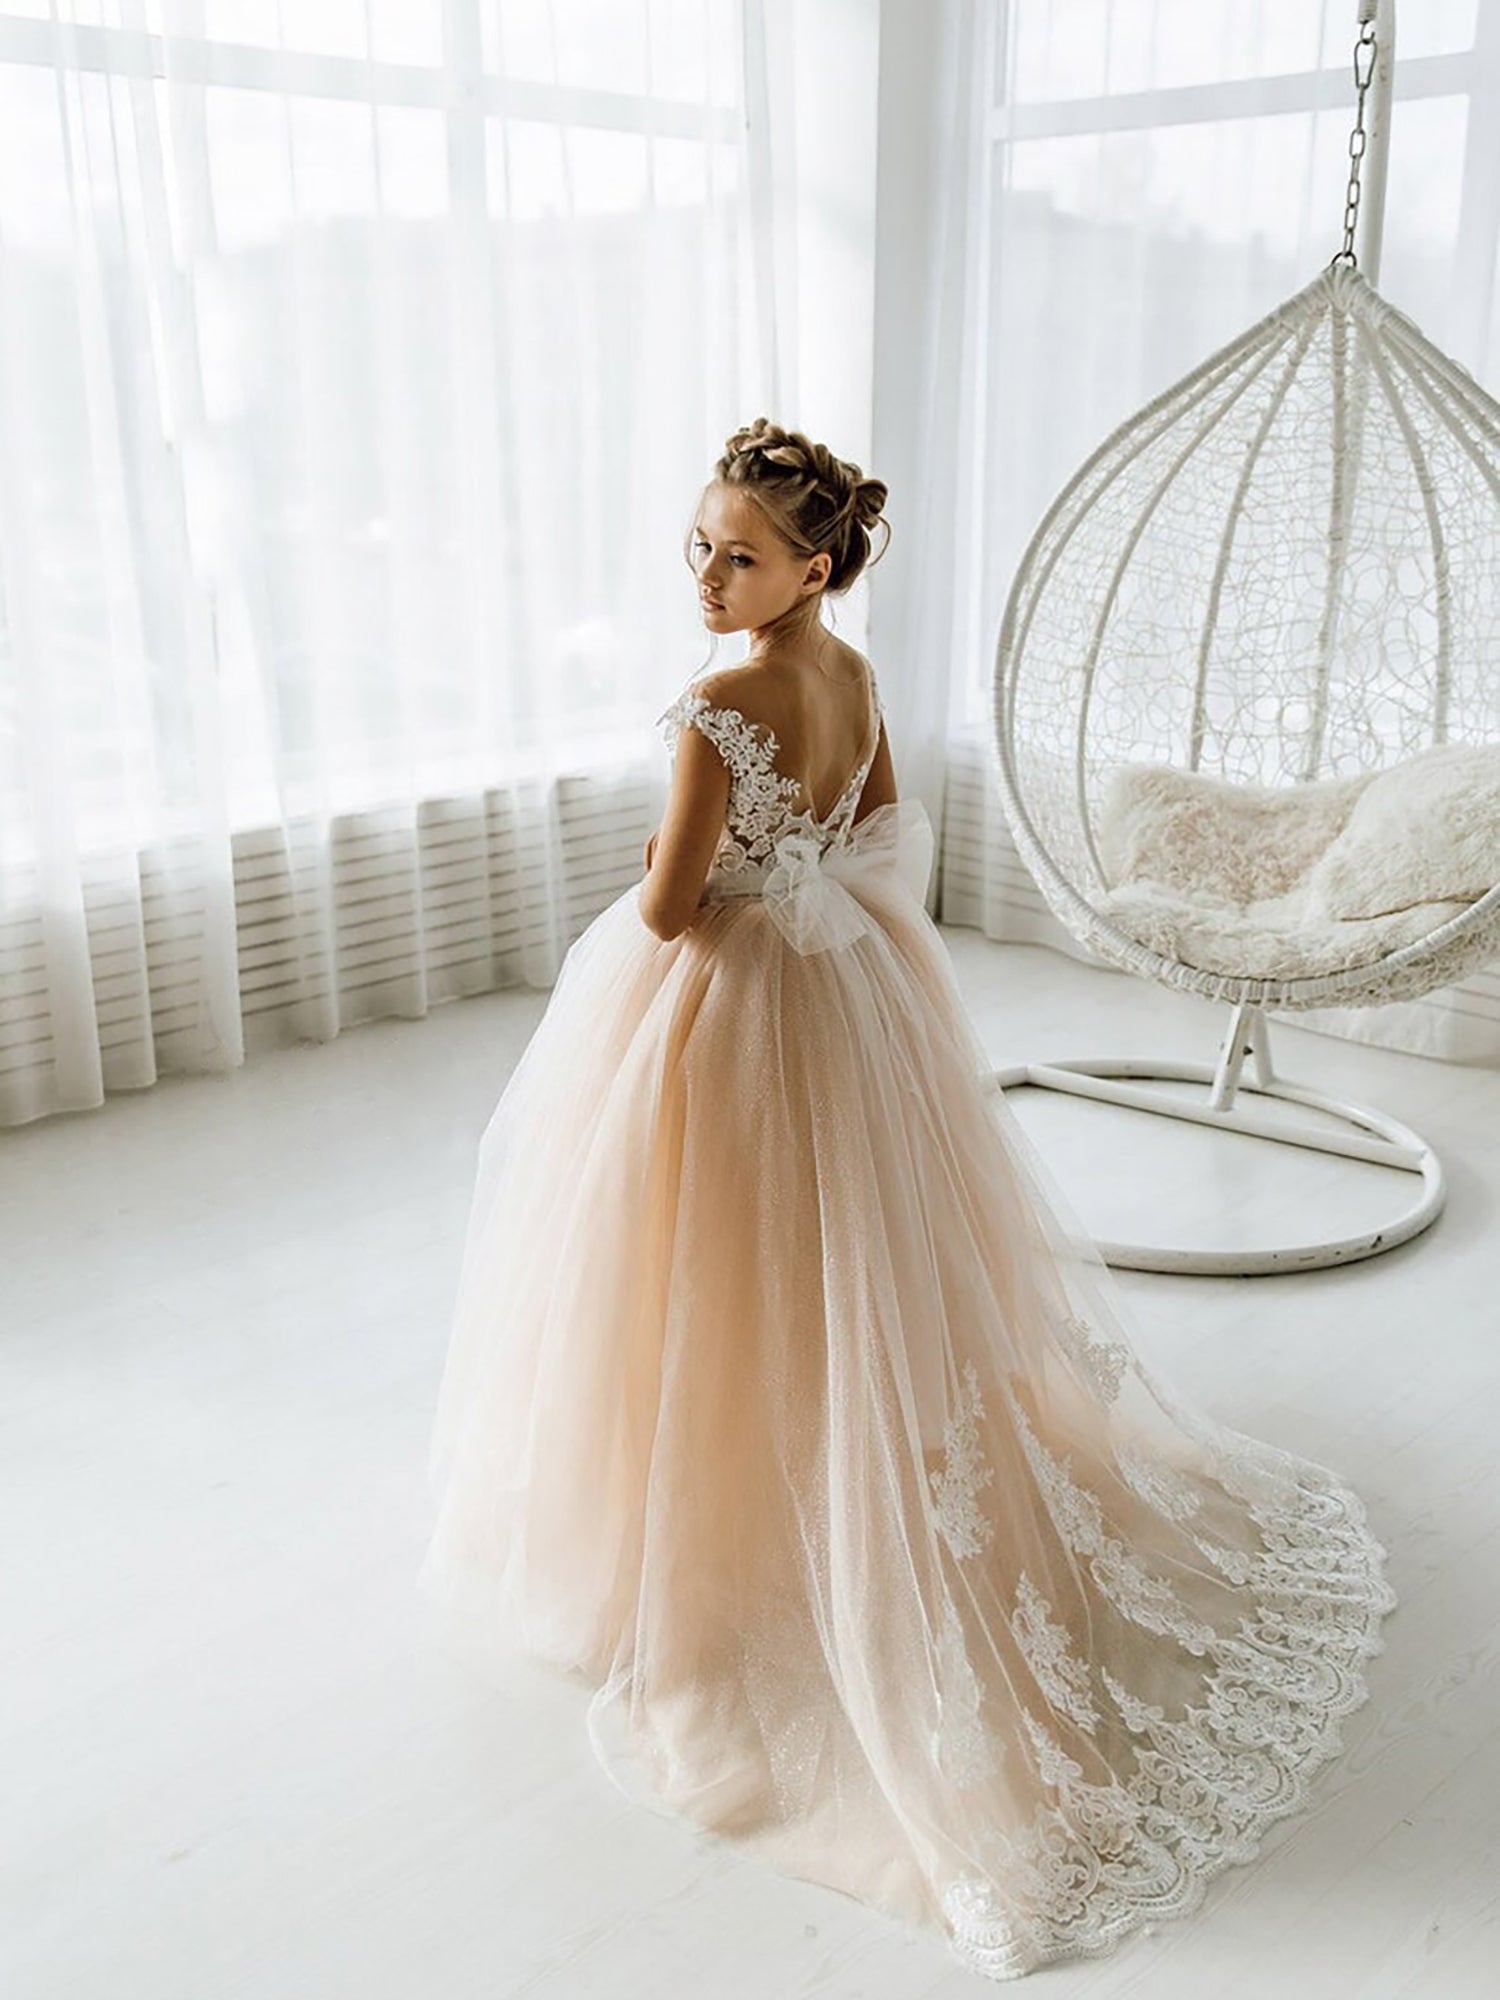 2022 Flower Girl Lightinthebox Party Dresses With Puffy Tulle Layers And Hi  Low Princess Style Perfect For First Communion, Christmas And Special  Occasions B0624X02 From Bestoffers, $91.47 | DHgate.Com